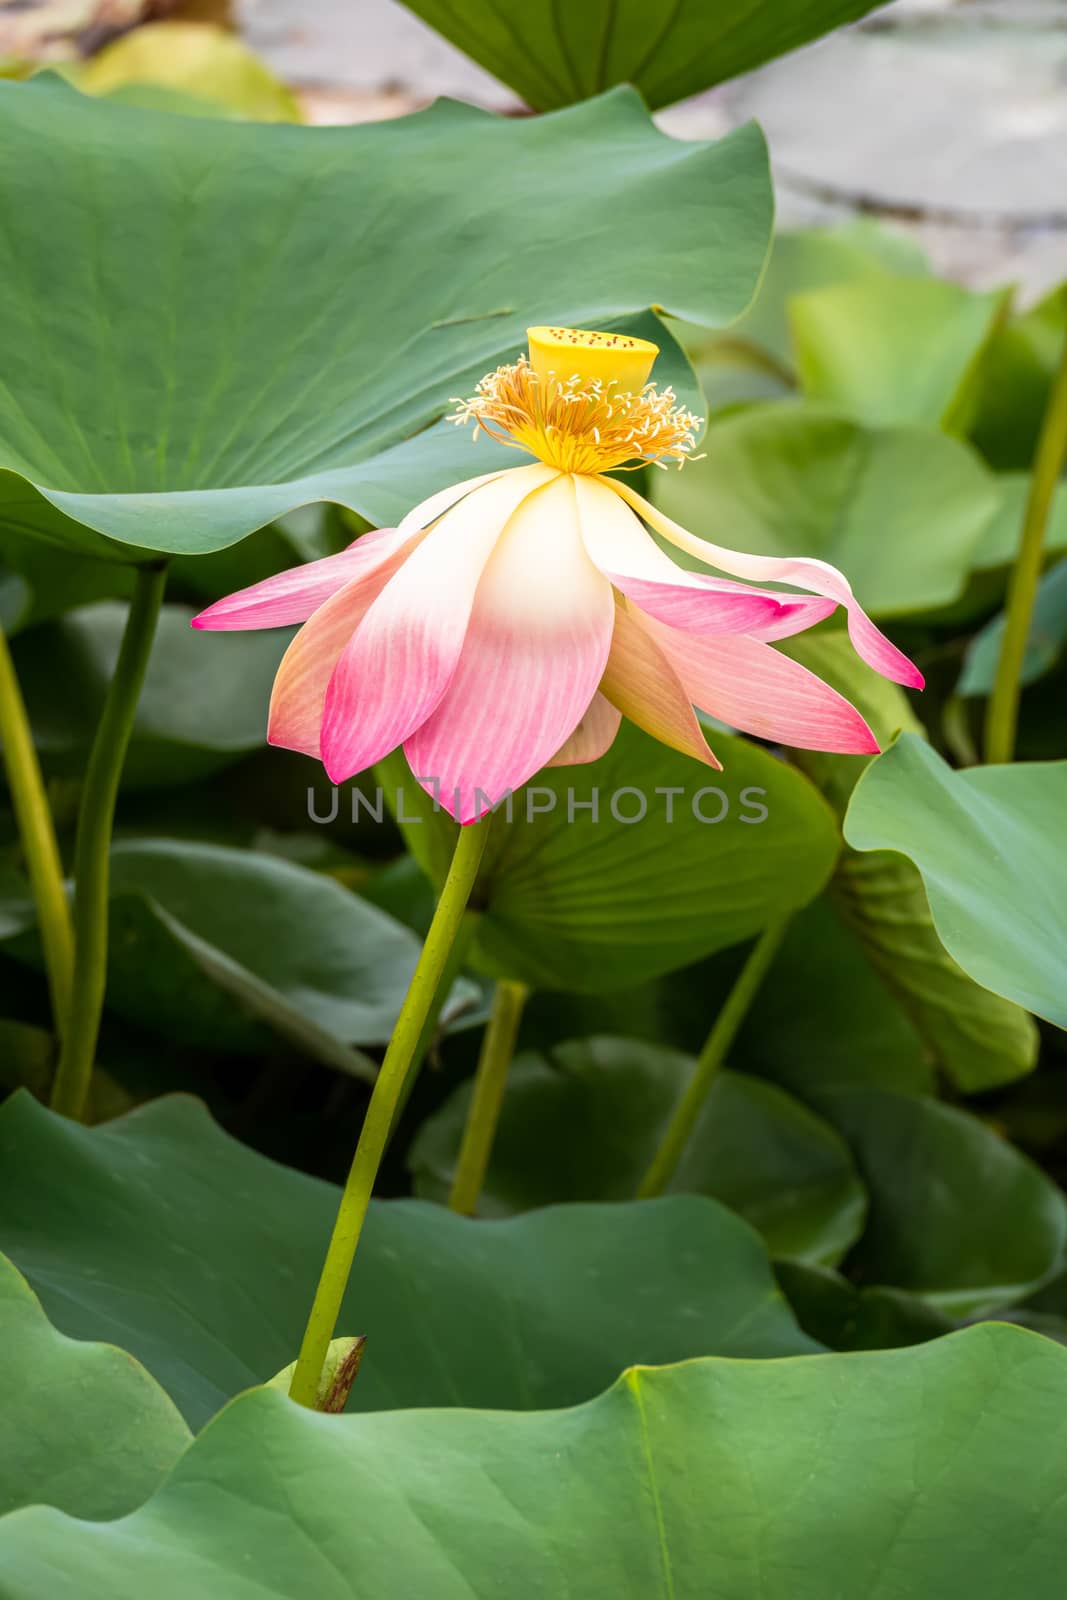 An image of a beautiful lotus flower blossom in the garden pond